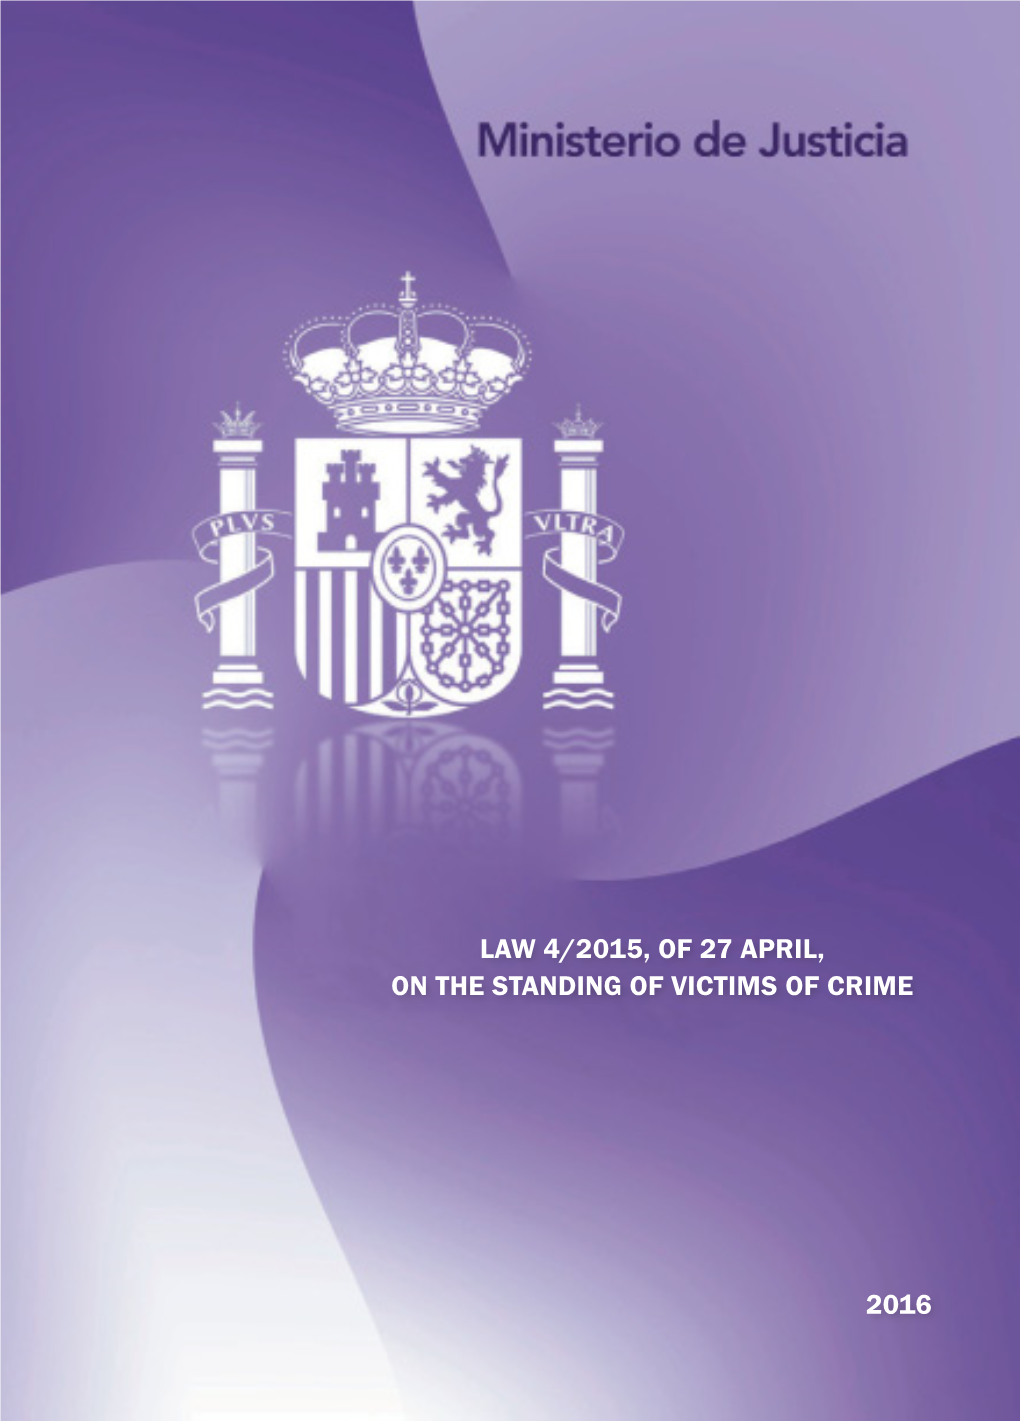 Law 4/2015, of 27 April, on the Standing of Victims of Crime 2016